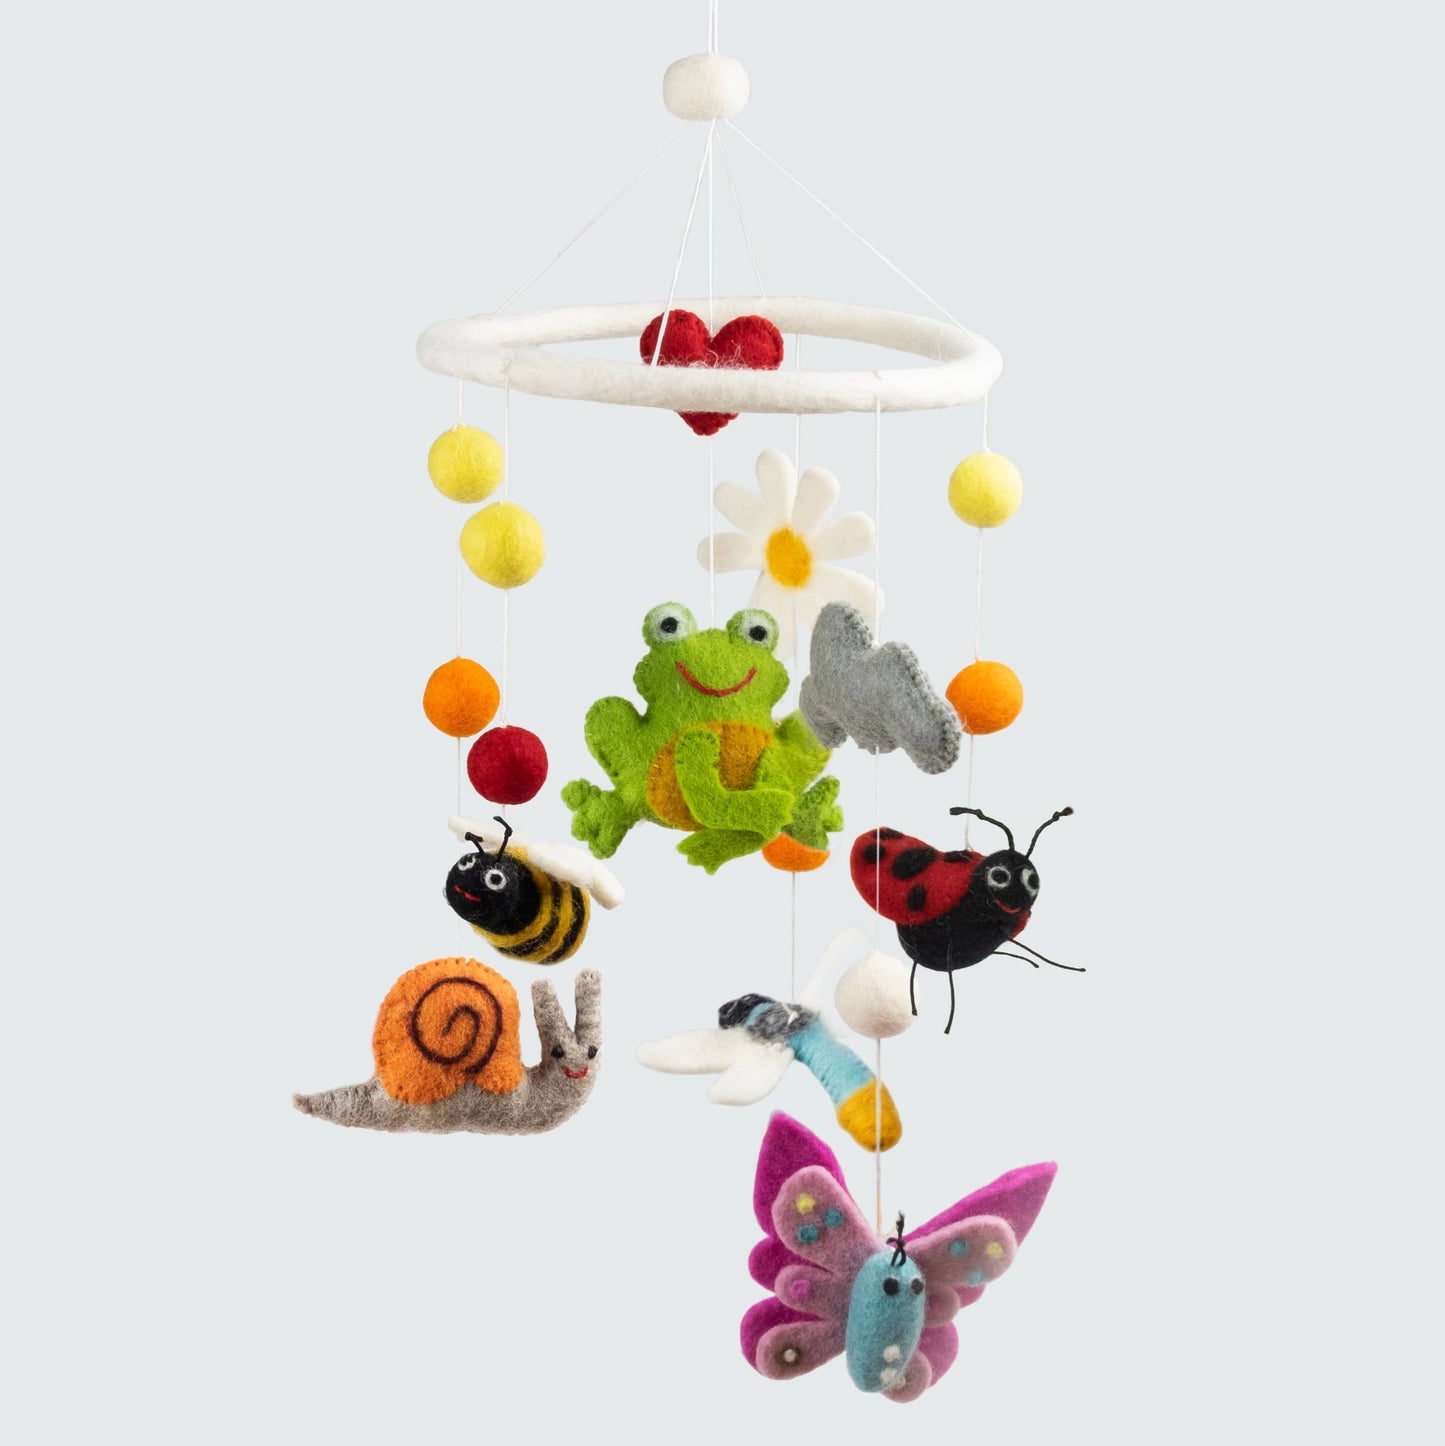 The Winding Road - Felt Mobile Frog, Butterfly, Snail, Dragonfly, Ladybug, Bee